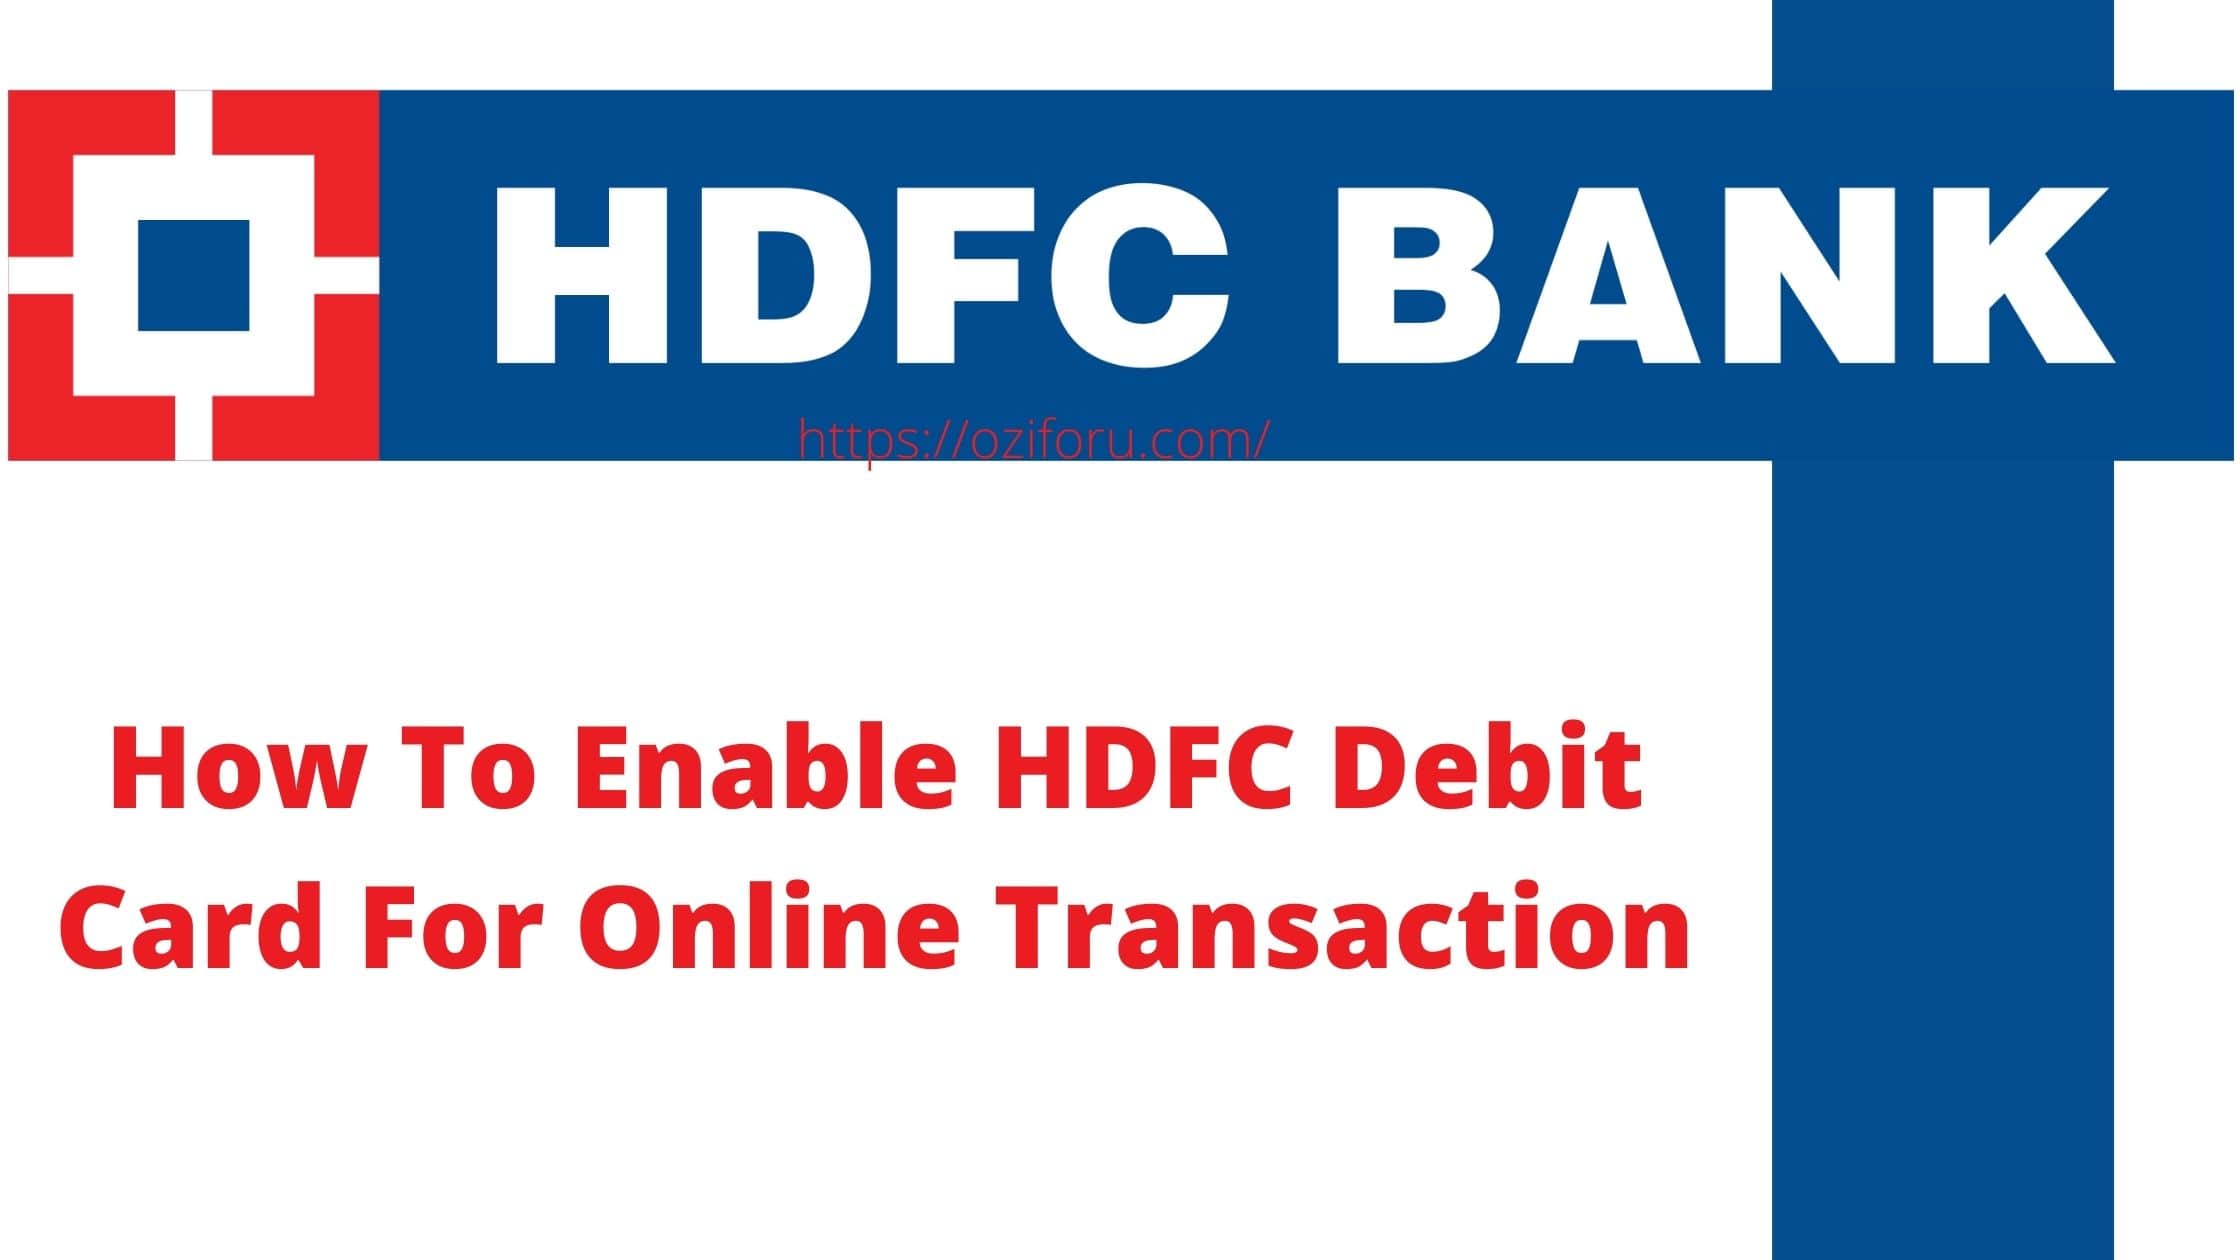 How To Enable HDFC Debit Card For Online Transaction